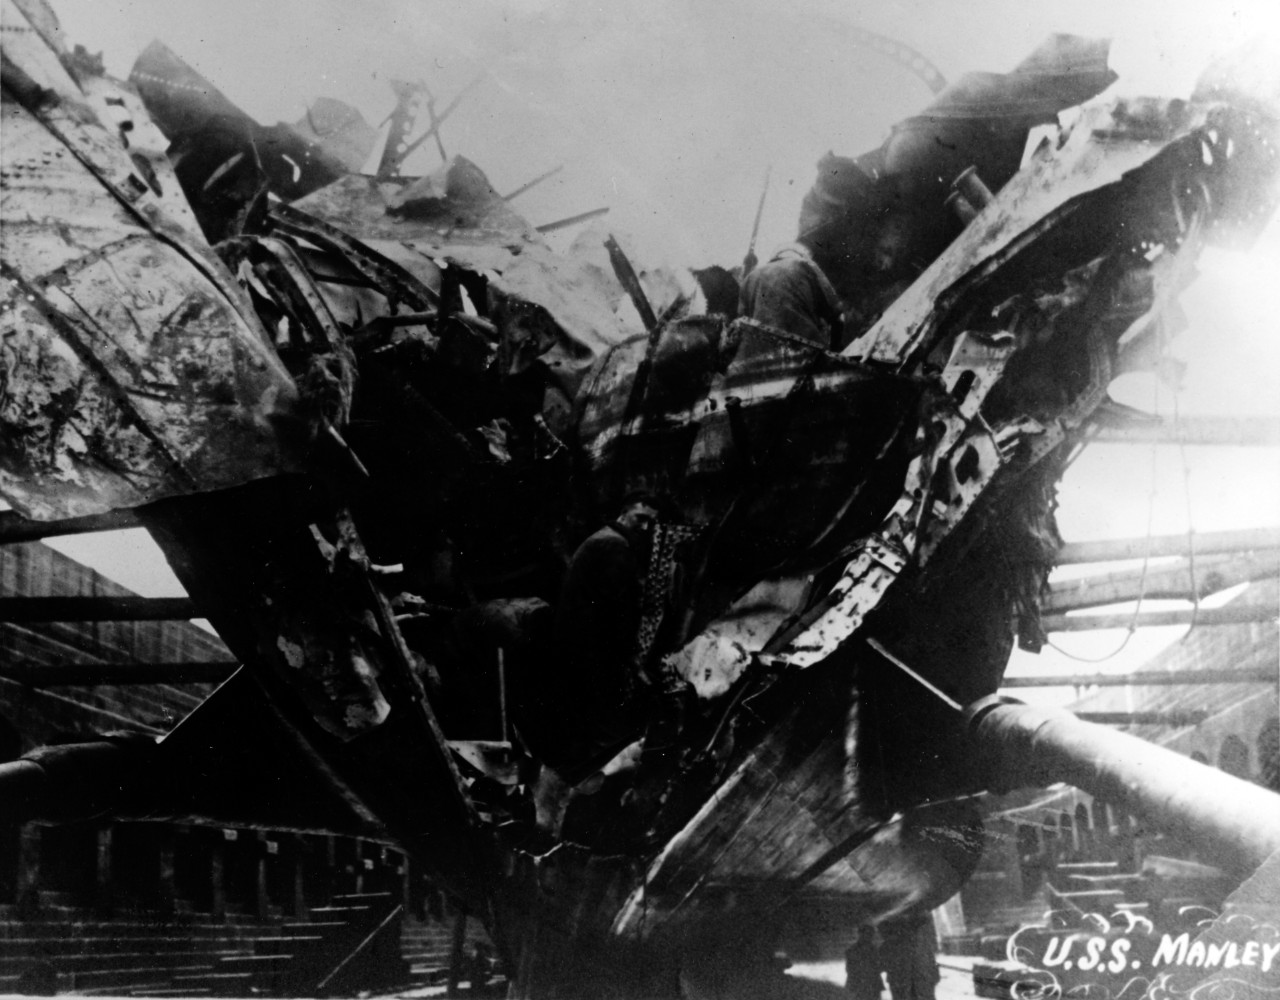 Damage received by USS MANLEY (DD-74) 